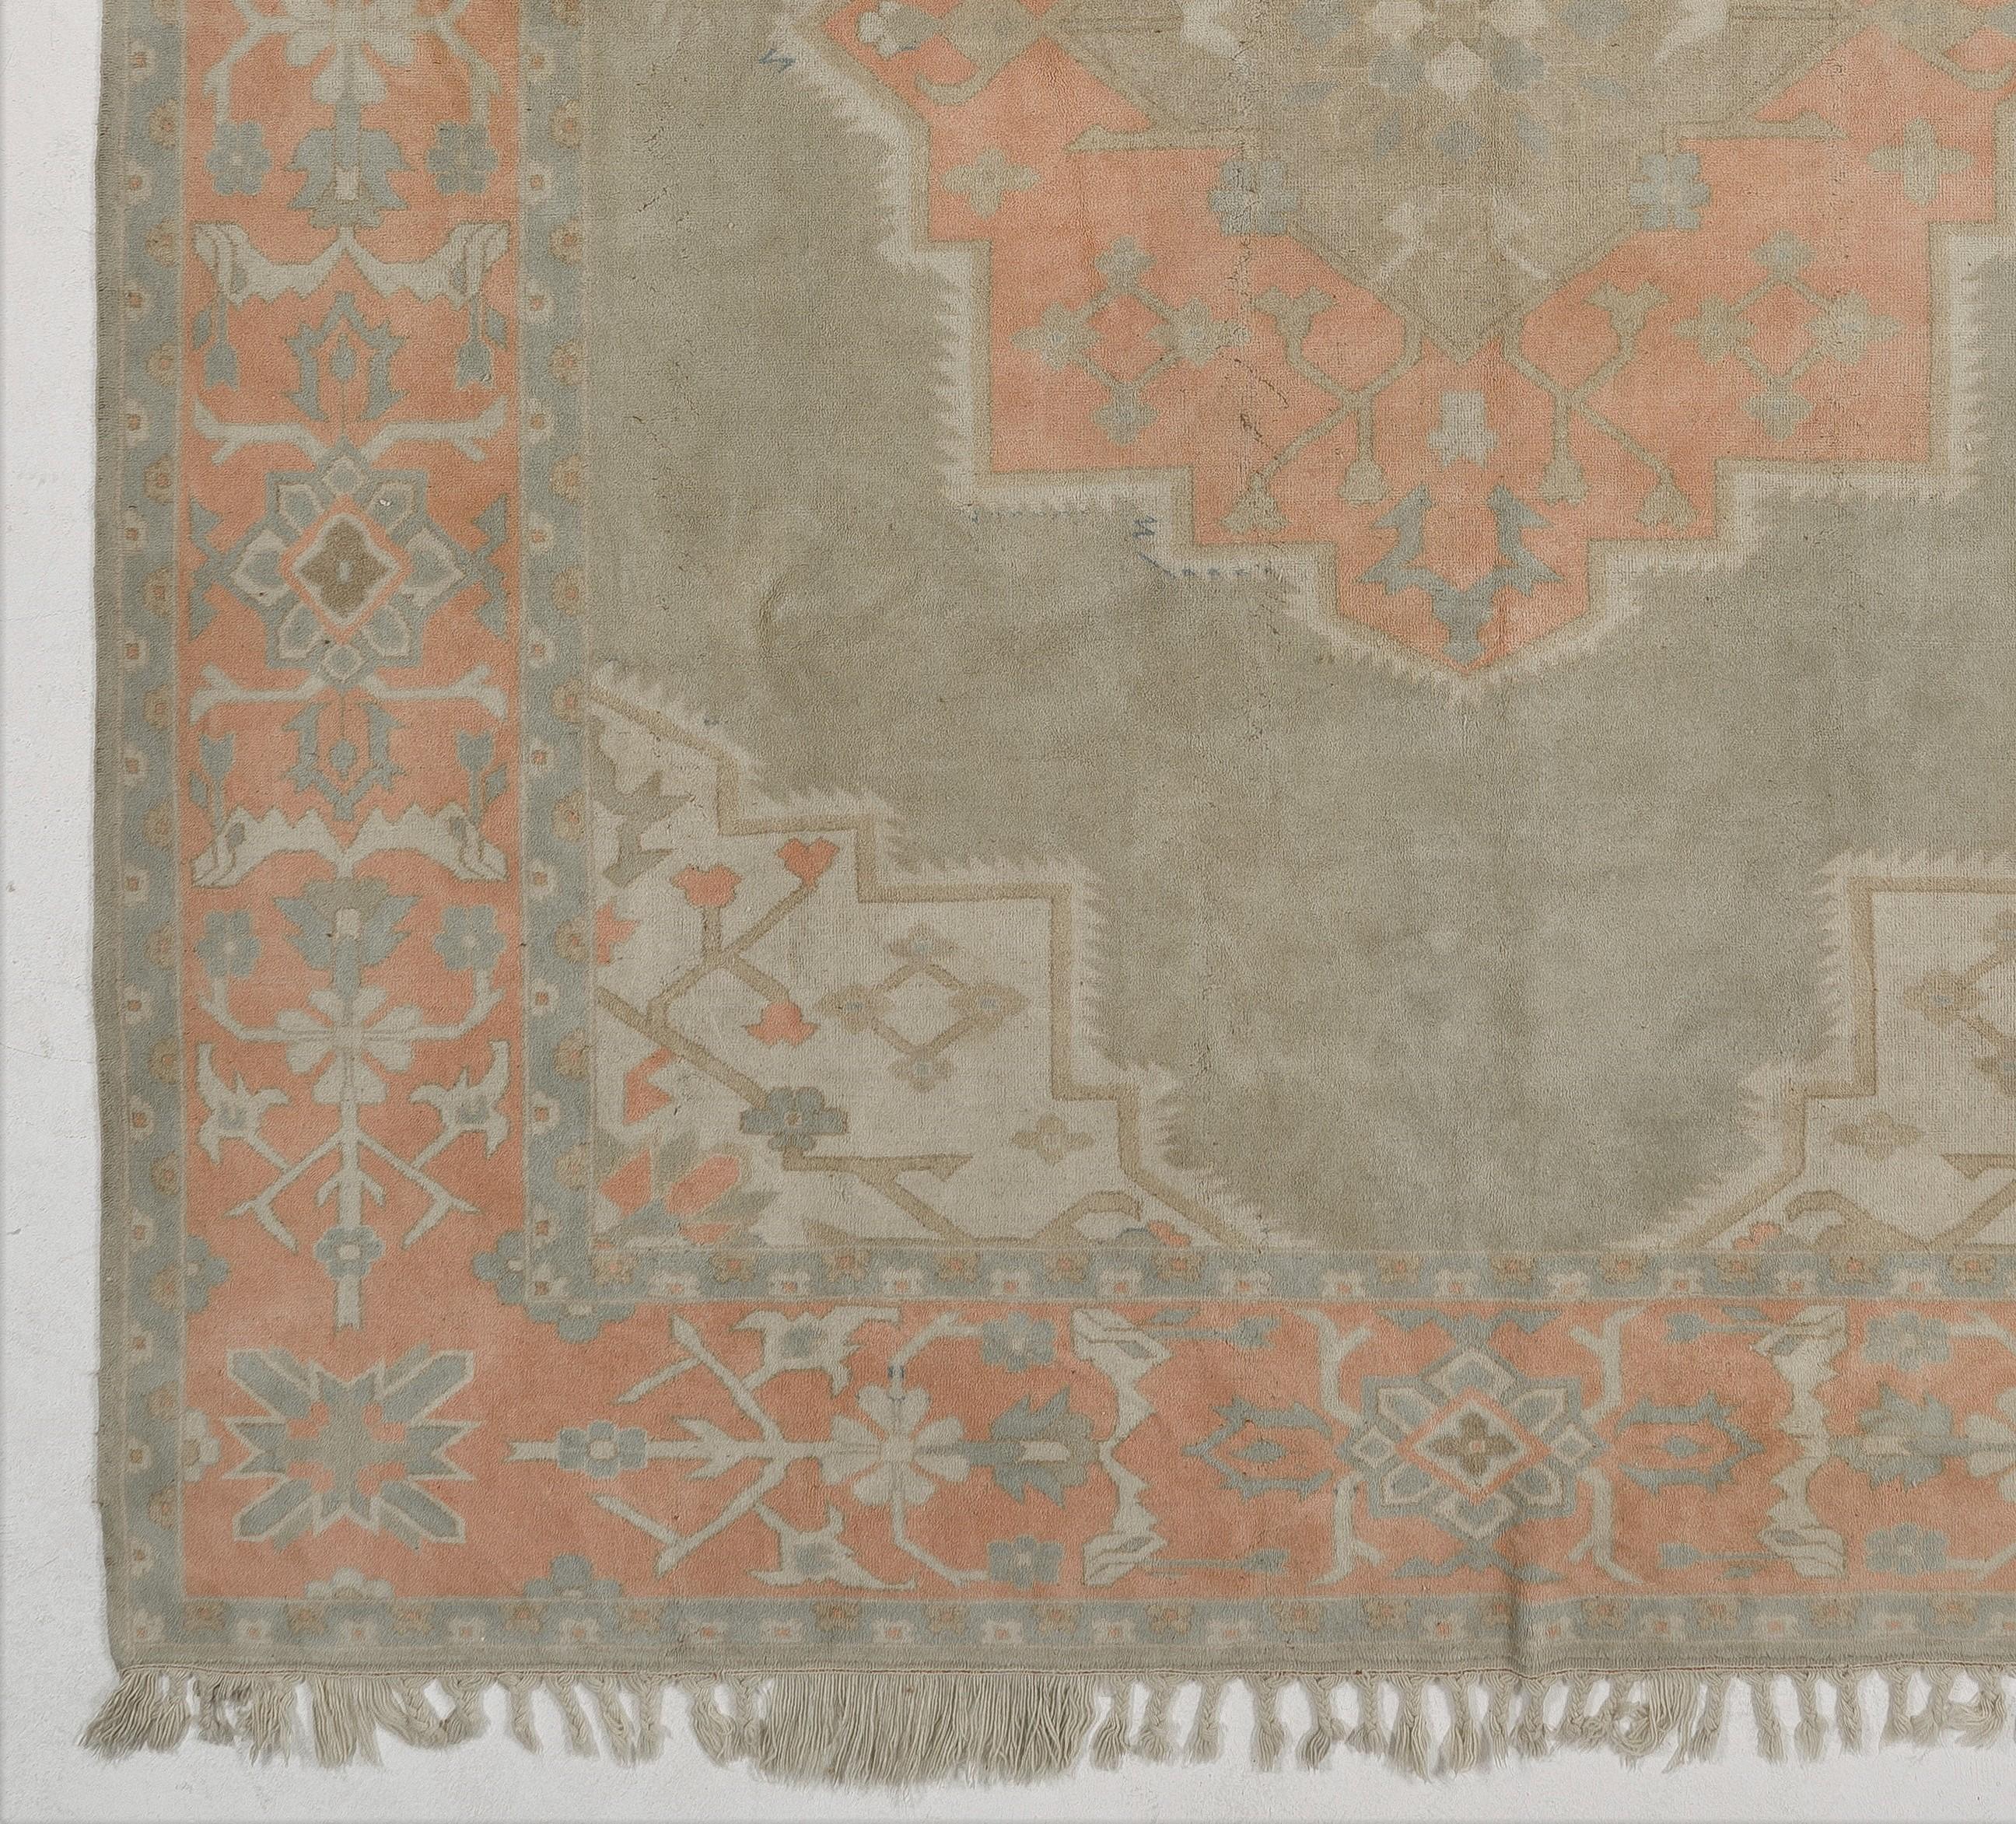 Turkish 10x12.4 Ft Midcentury One-of-a-Kind Oushak Wool Rug in Soft Colors, Natural Dyes For Sale